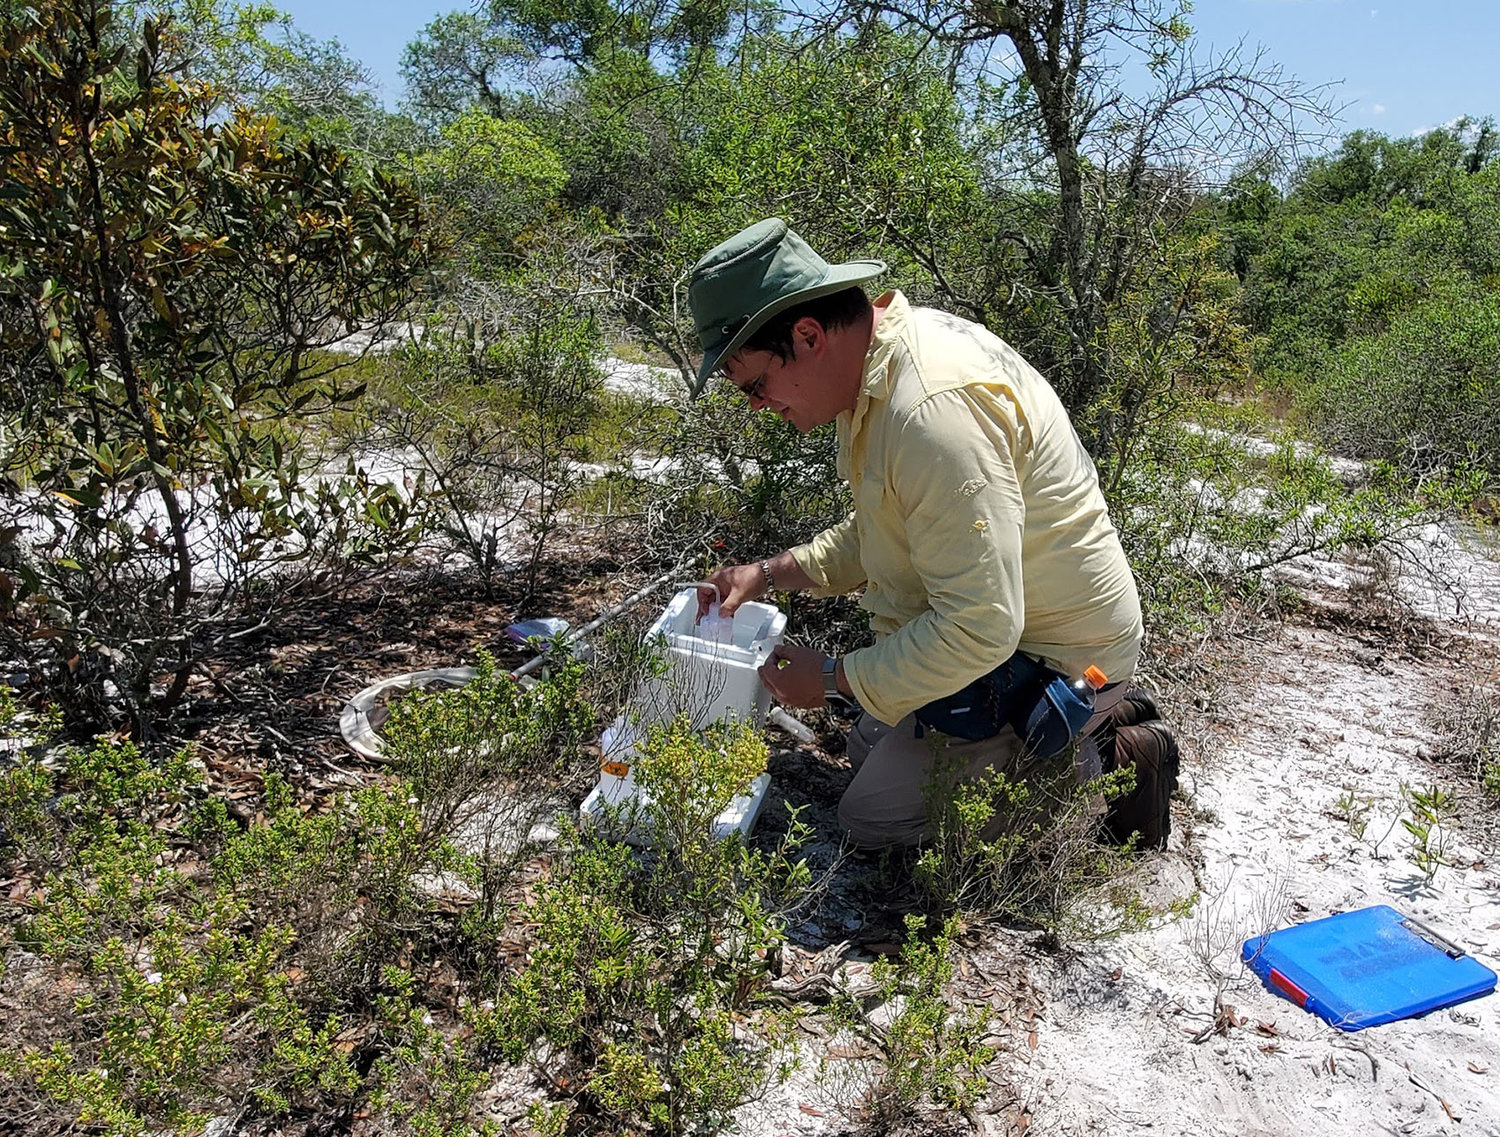 Kimmel surveys sand pine scrub for the blue calamintha bee. He has observed bees he previously captured and marked foraging at the same bush at the same time on subsequent days, raising questions about the bee’s range and how far they travel for food.